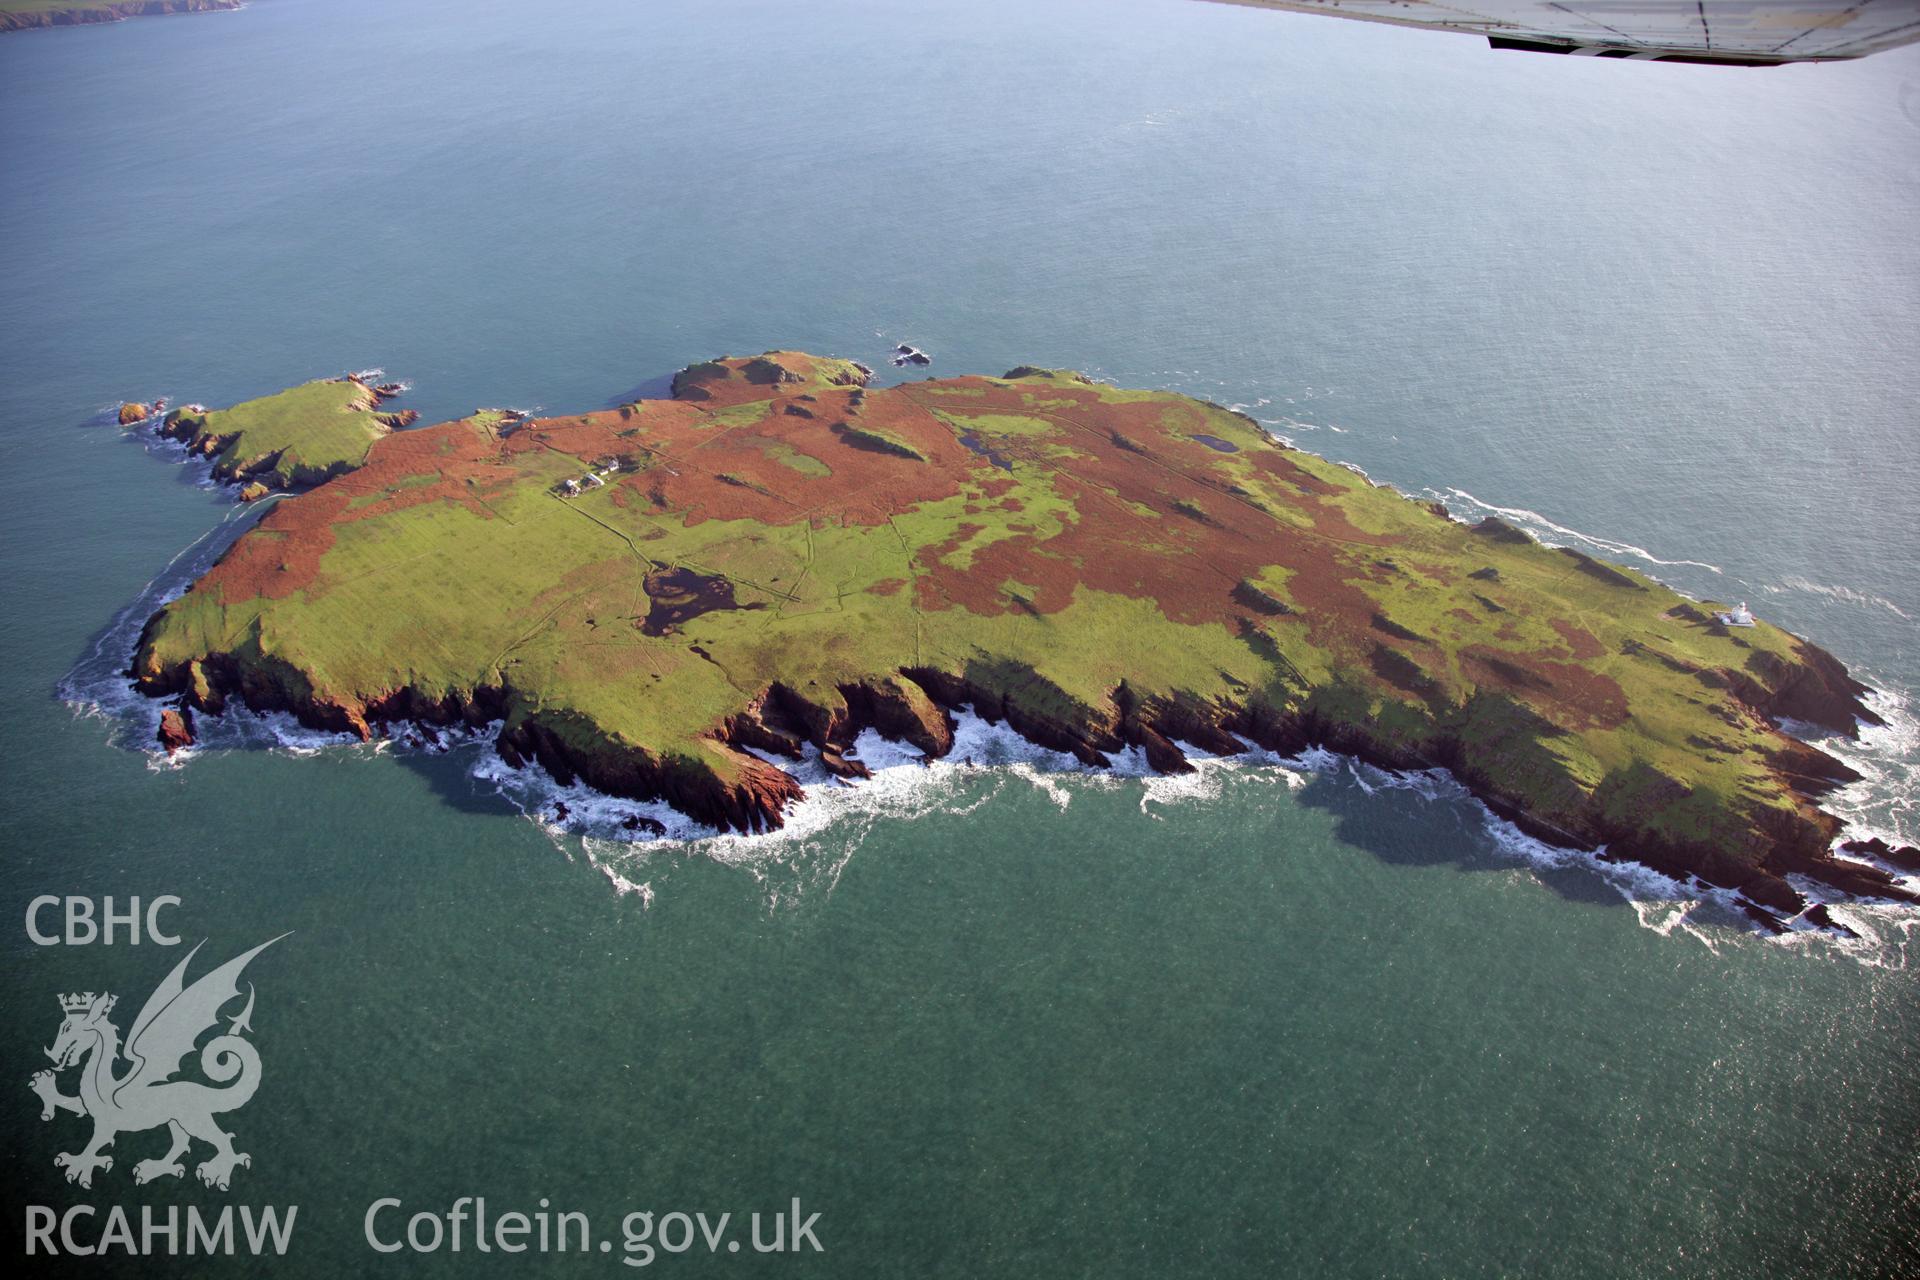 RCAHMW colour oblique photograph of Skokholm Island, viewed from the north-west. Taken by O. Davies & T. Driver on 22/11/2013.